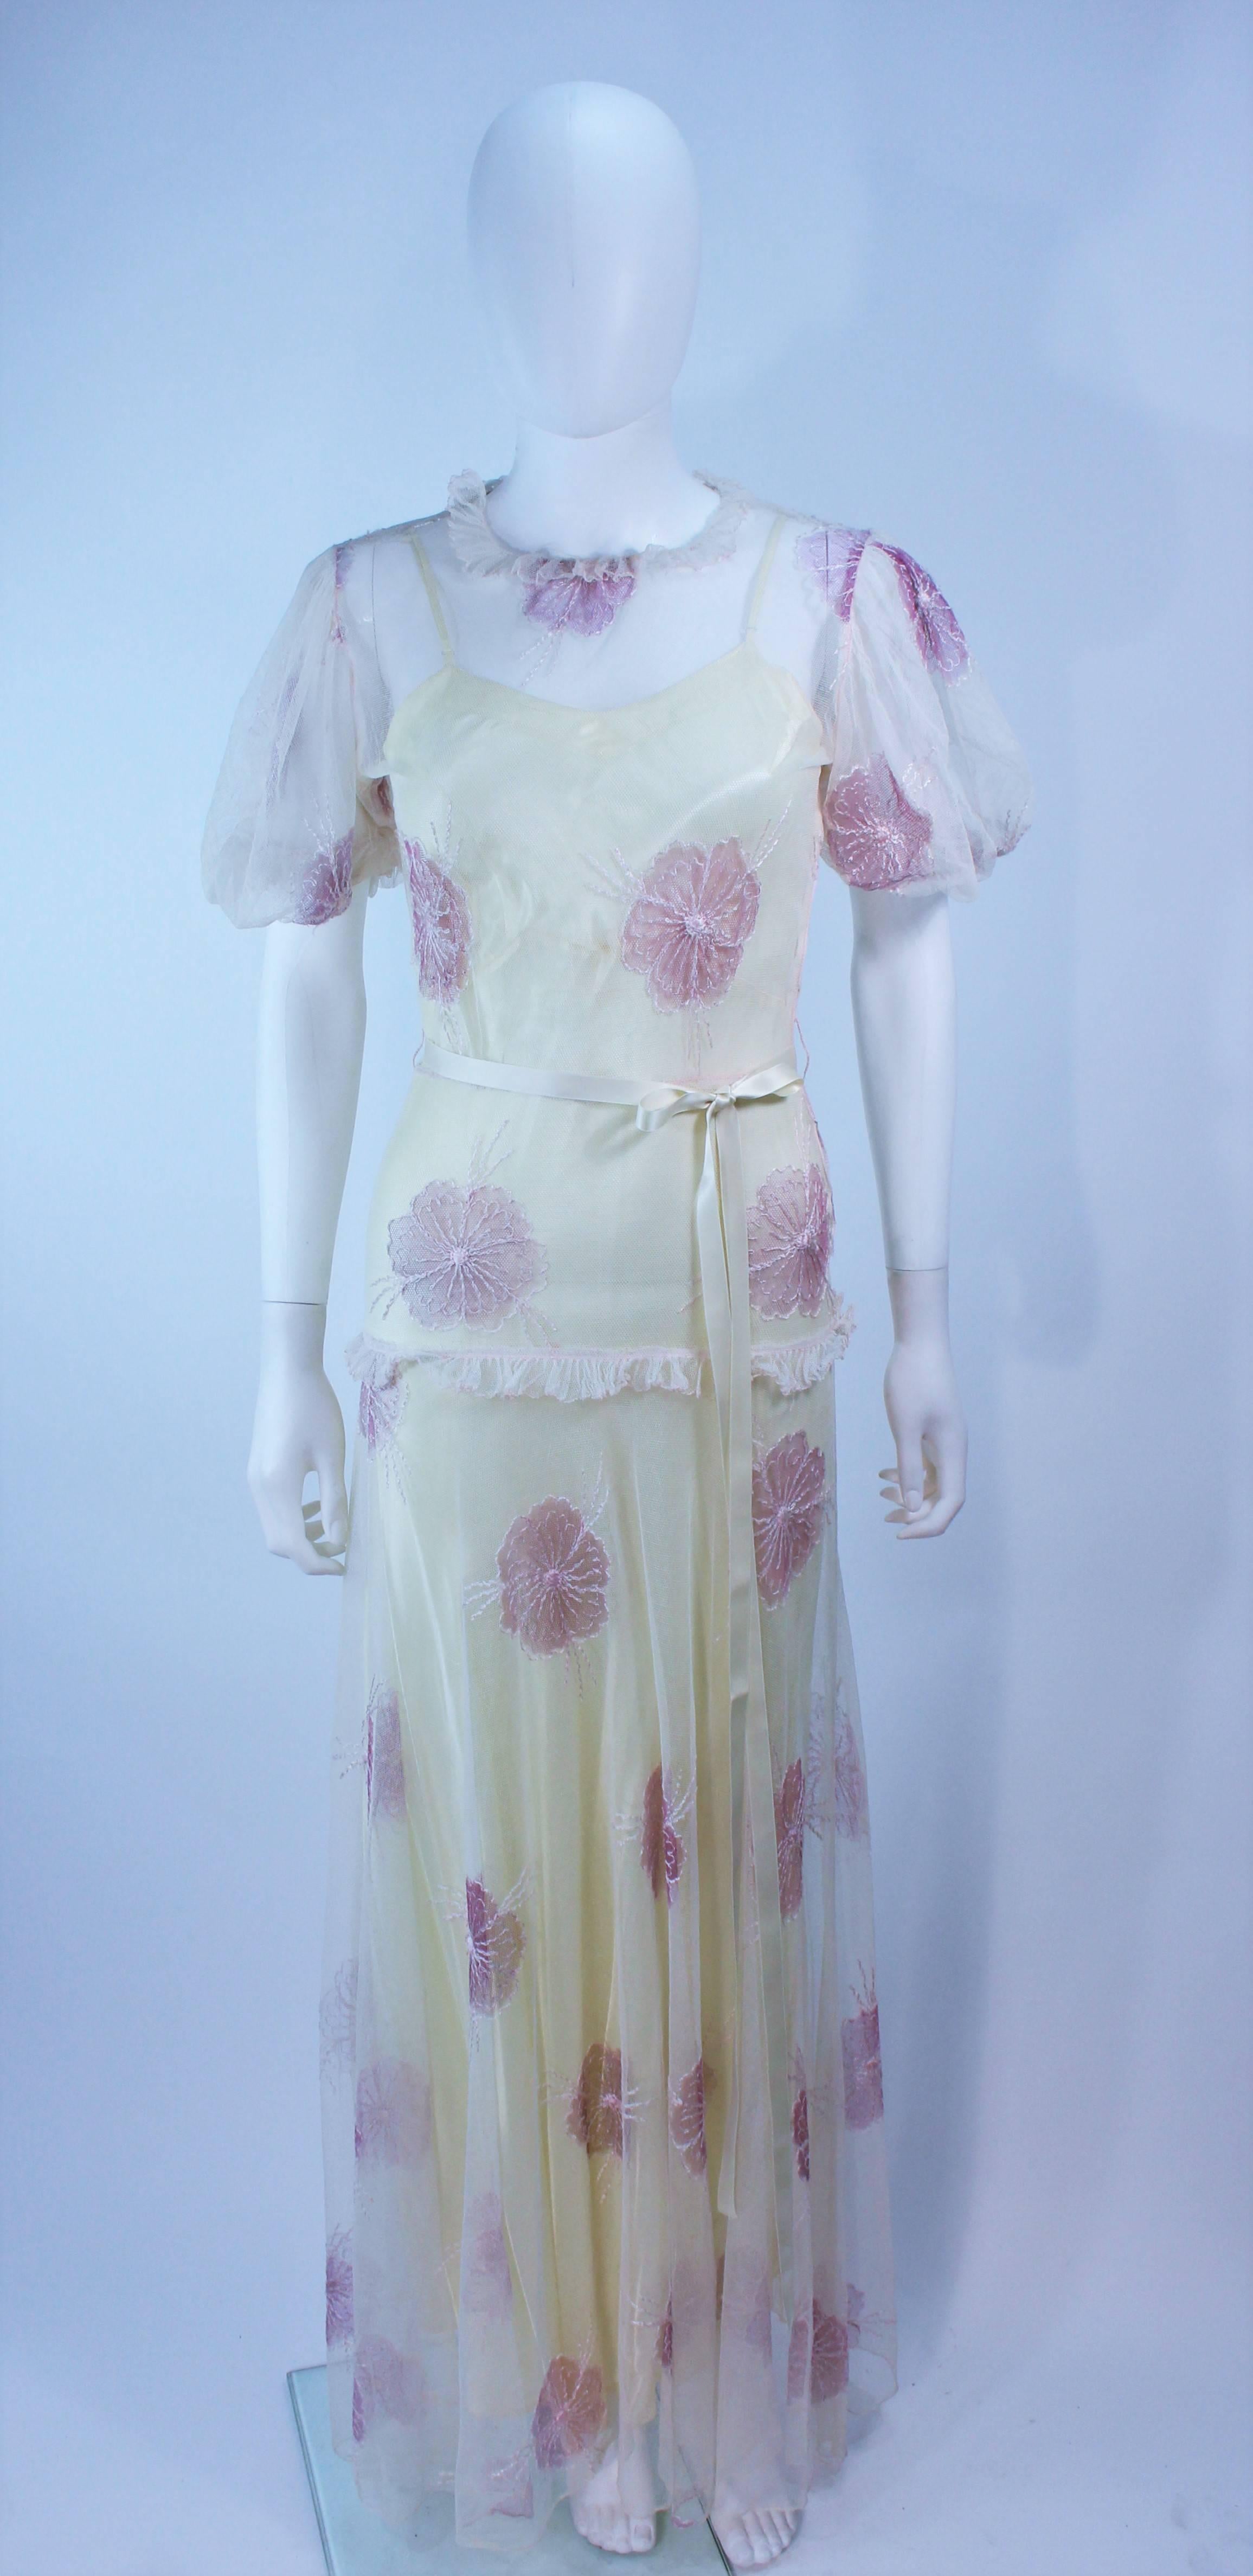  This gown is composed of 2 pieces, a sheer outer layer made of a floral patterned fabric with ruffle trim, as well as a yellow satin slip. Features a pullover style. In excellent vintage condition.

  **Please cross-reference measurements for